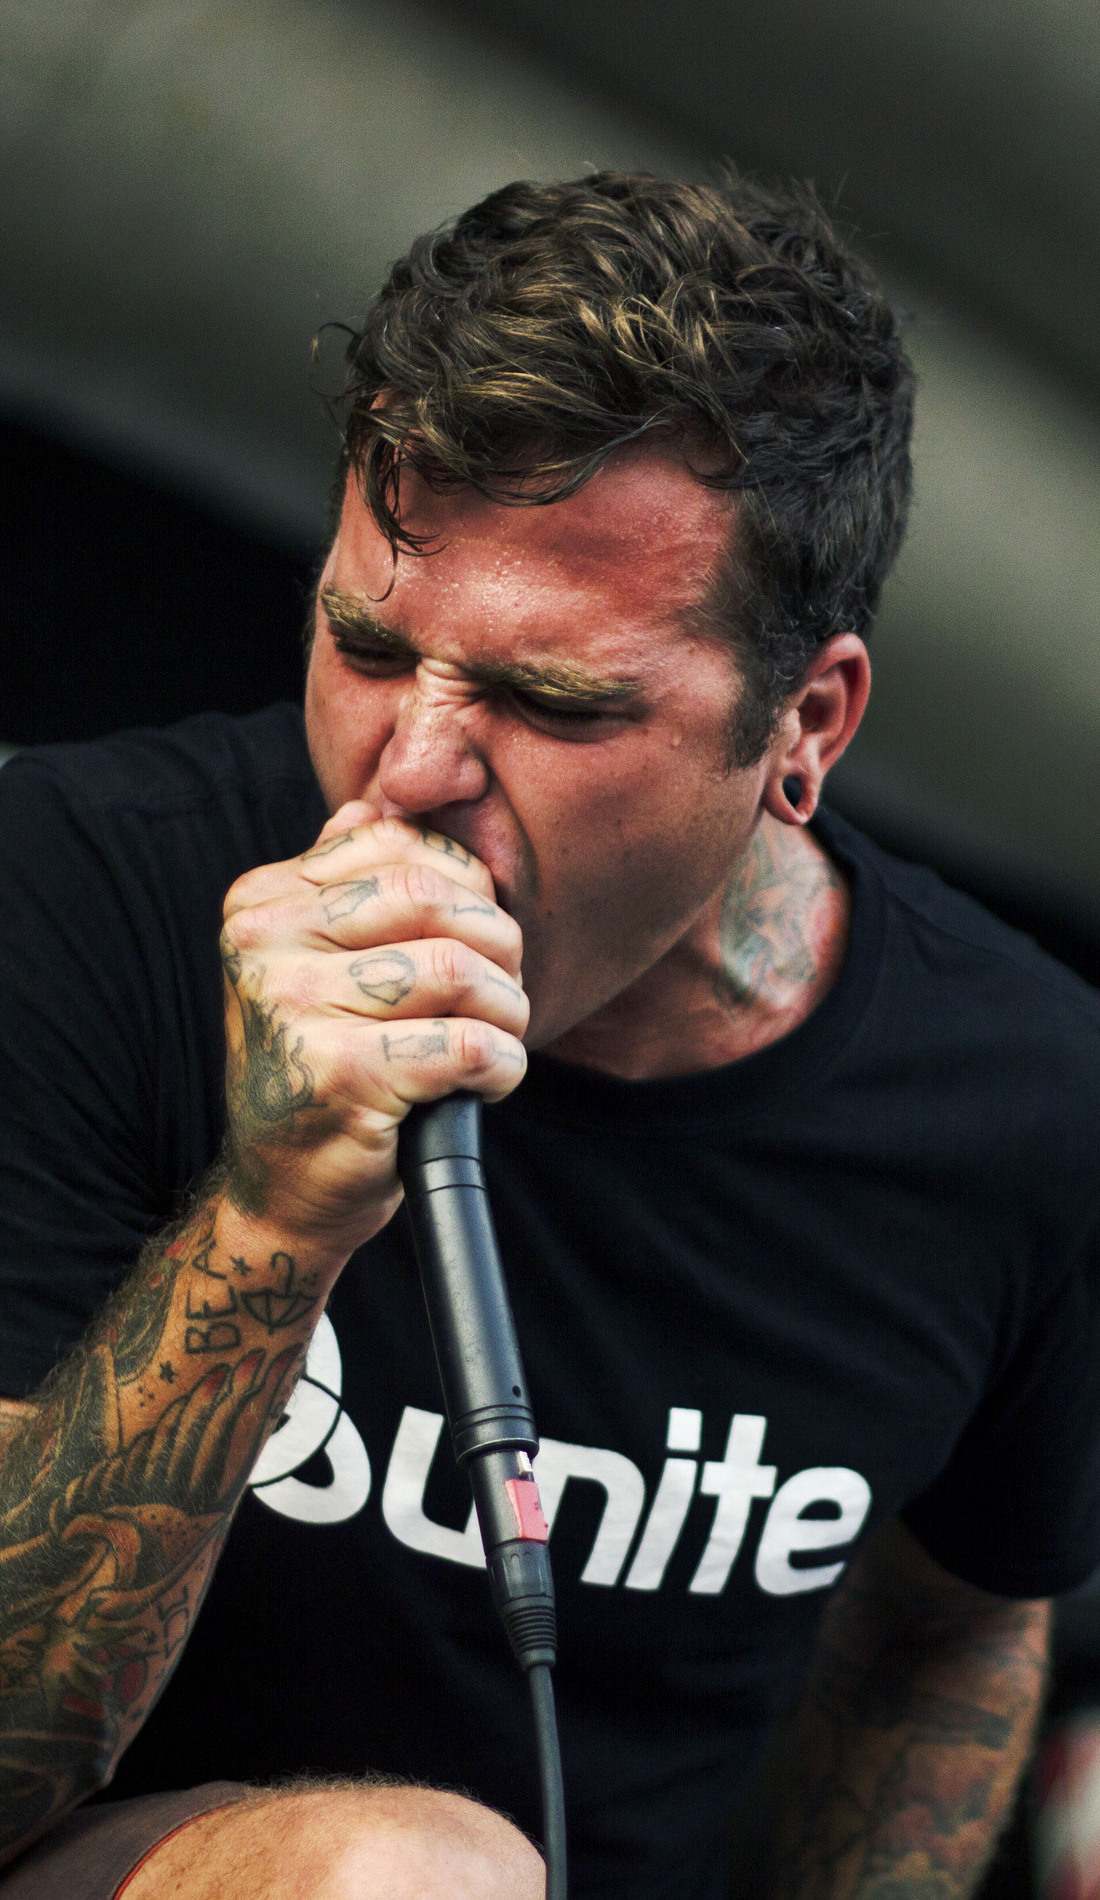 A The Amity Affliction live event